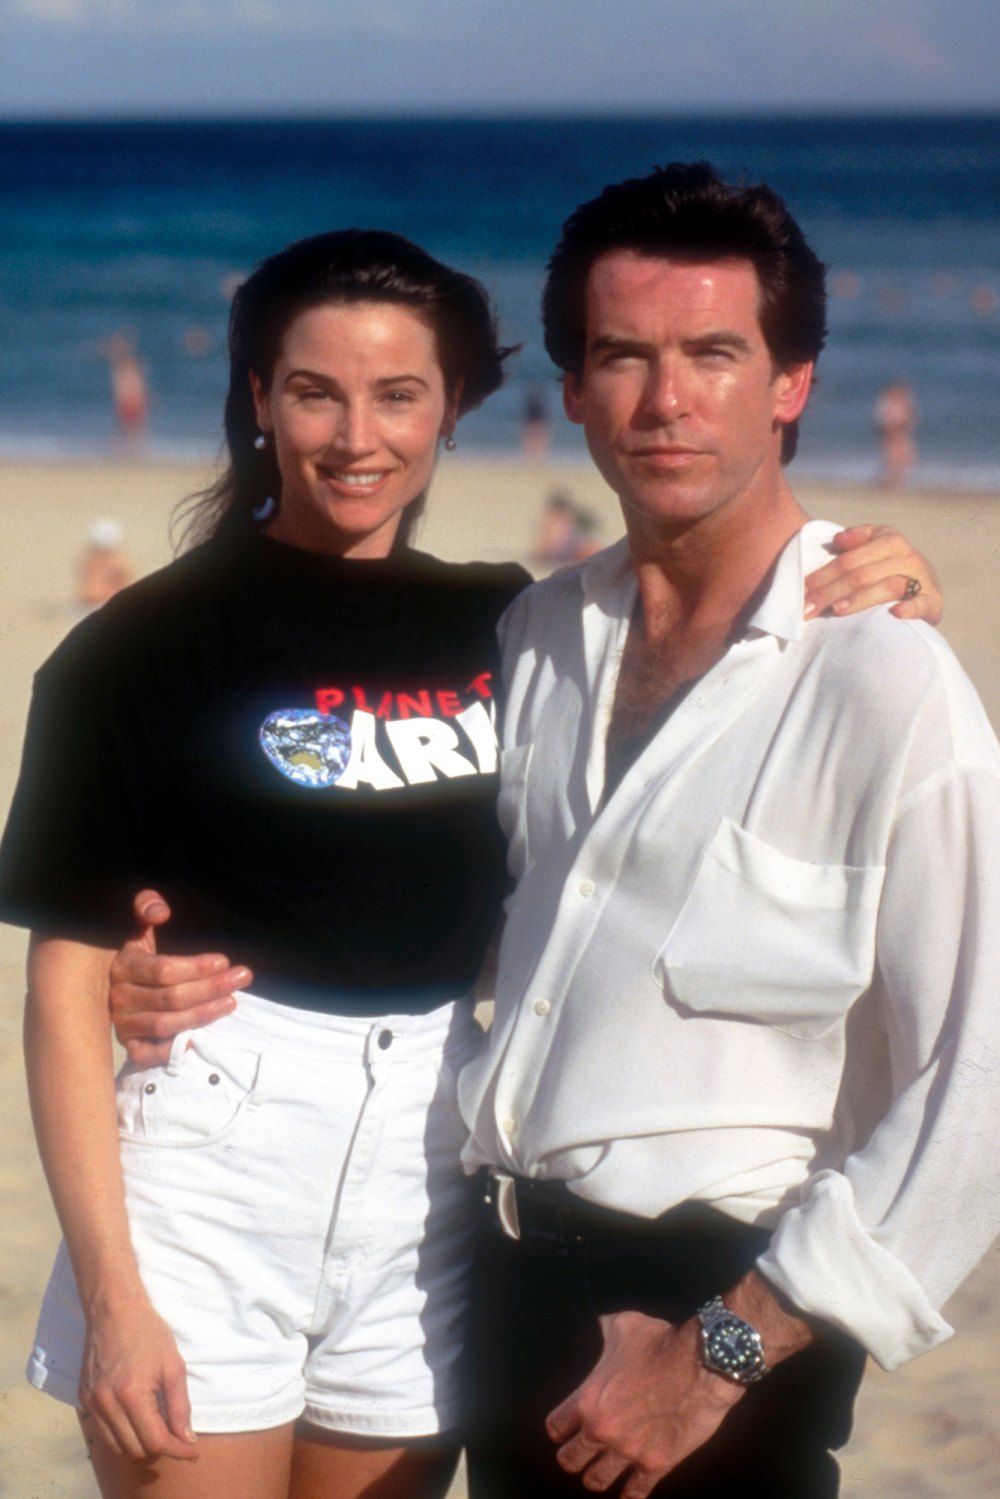 Pierce Brosnan Reflects on How Many Many Hardships Strengthened His Marriage to Wife Keely